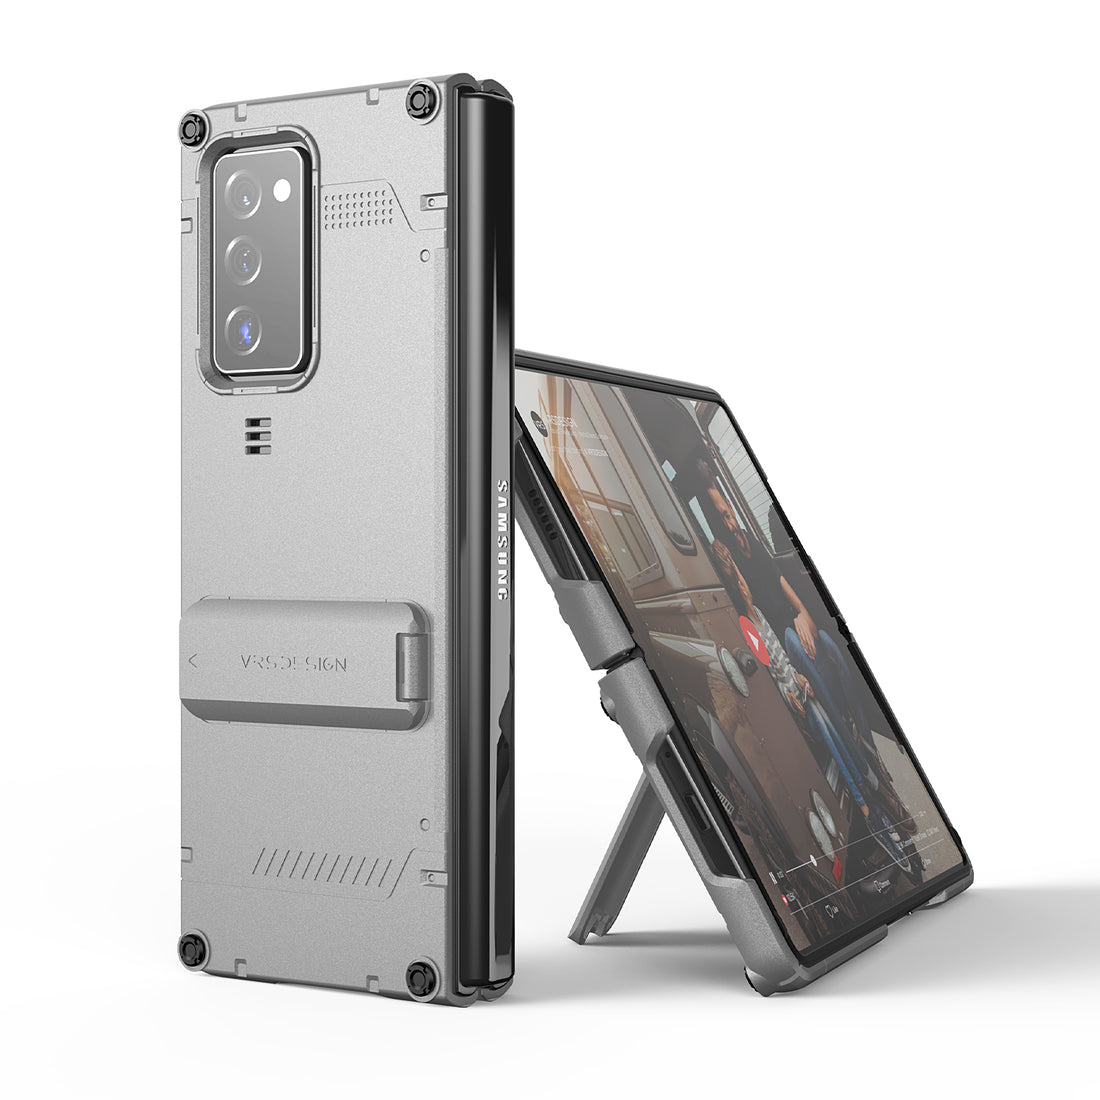 Samsung Galaxy Z Fold 2 wallet rugged case with multiple durable and convenient card slot with sleek minimalism by VRS